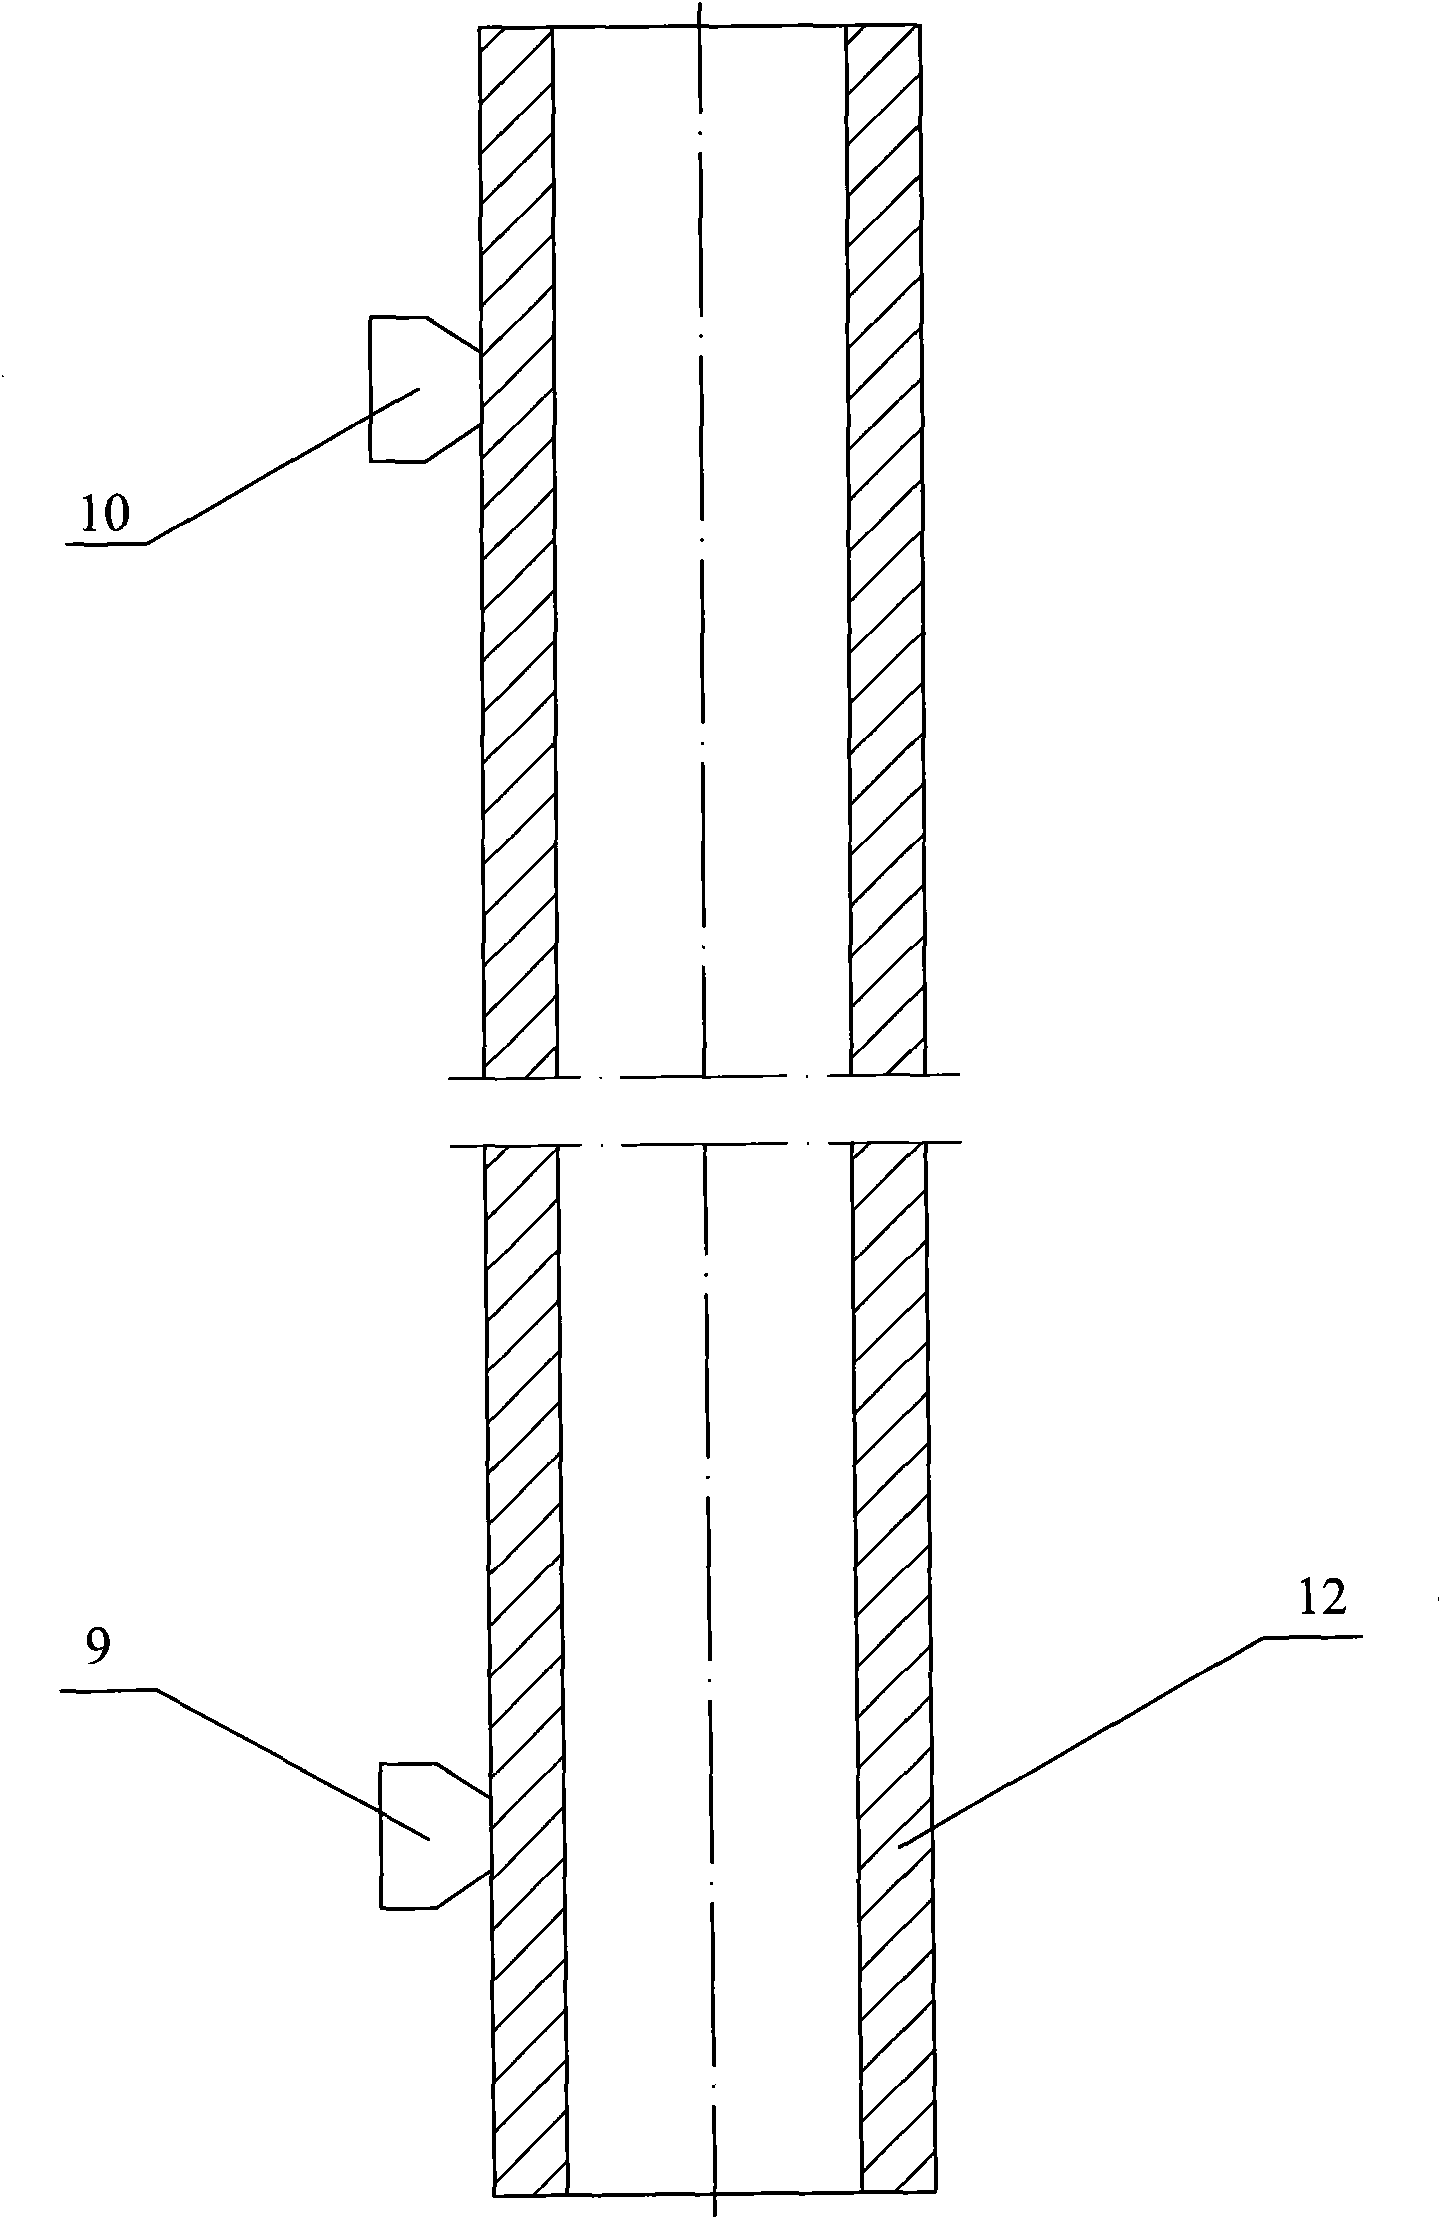 Ultrasonic measured and controlled water distributing device